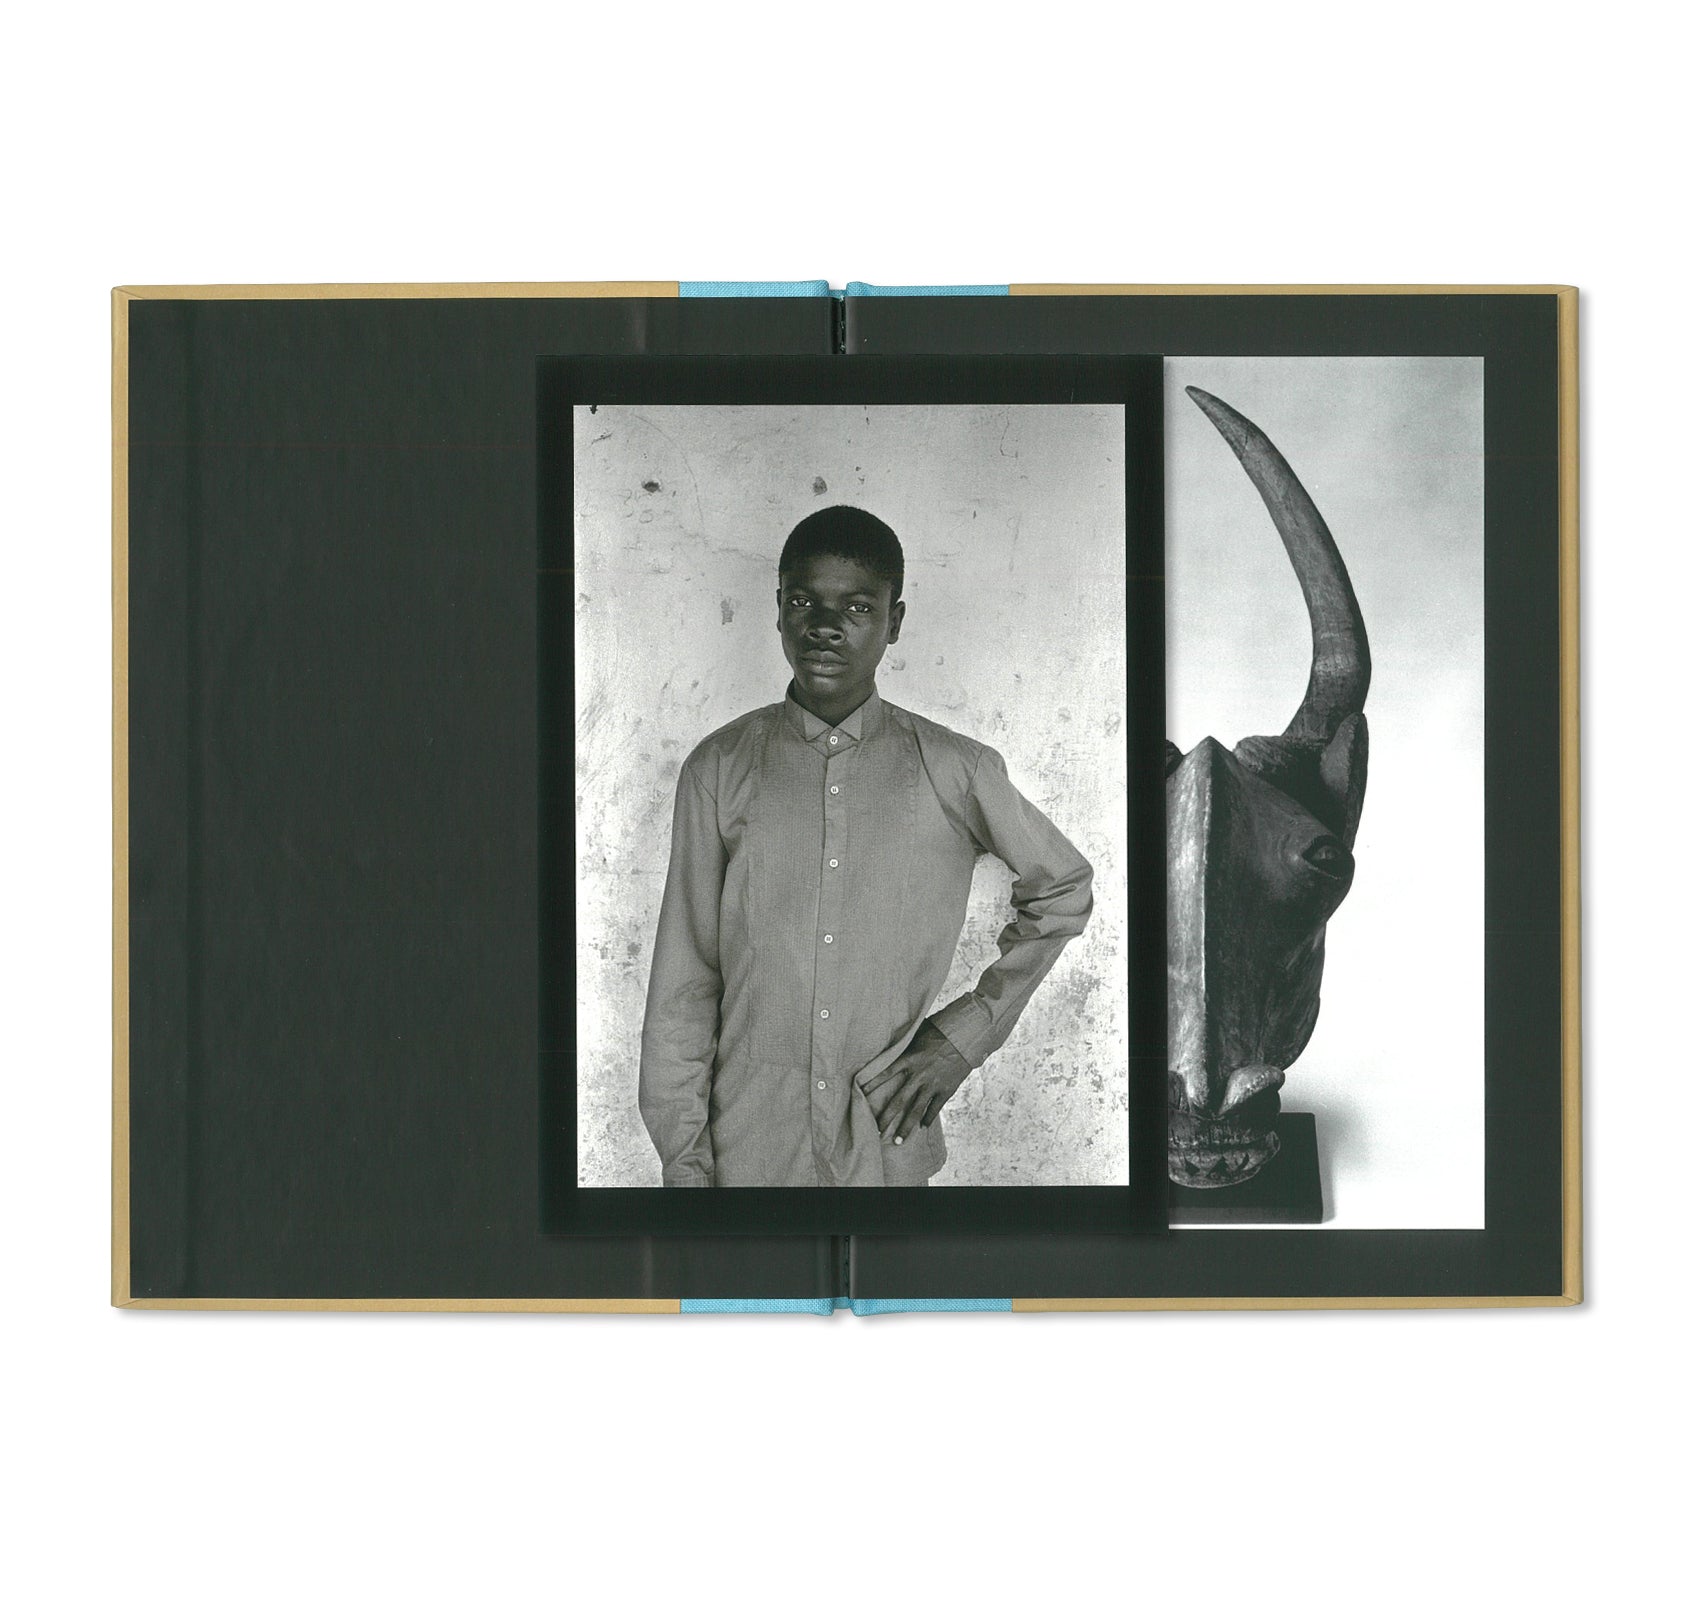 AFRICA: GEMS AND JEWELS　Carrie Mae Weems